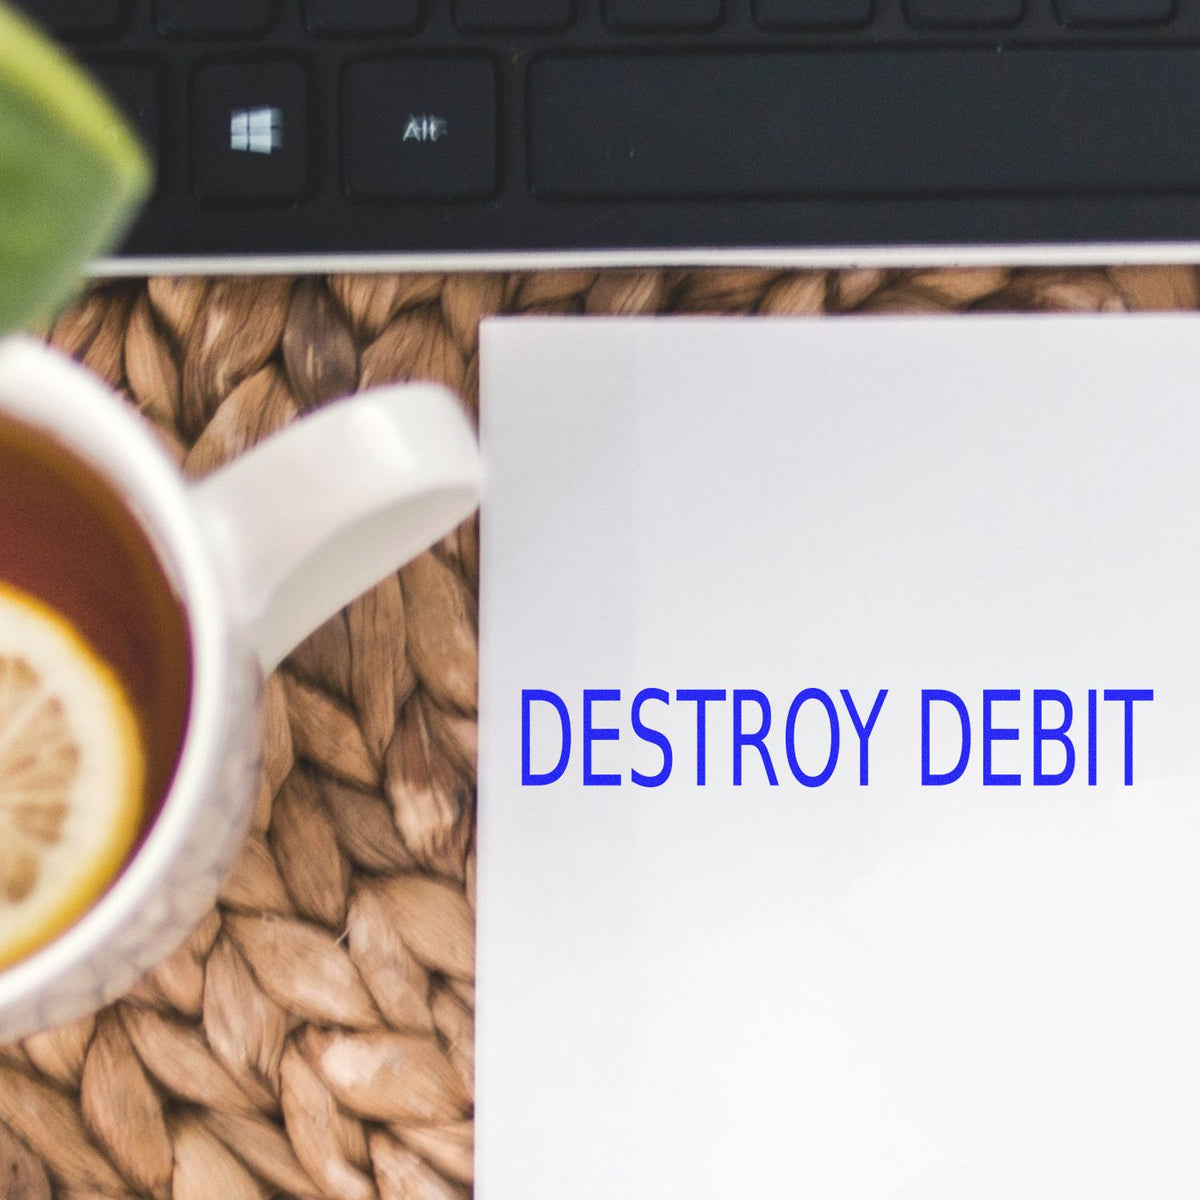 Large Self Inking Destroy Debit Stamp In Use Photo